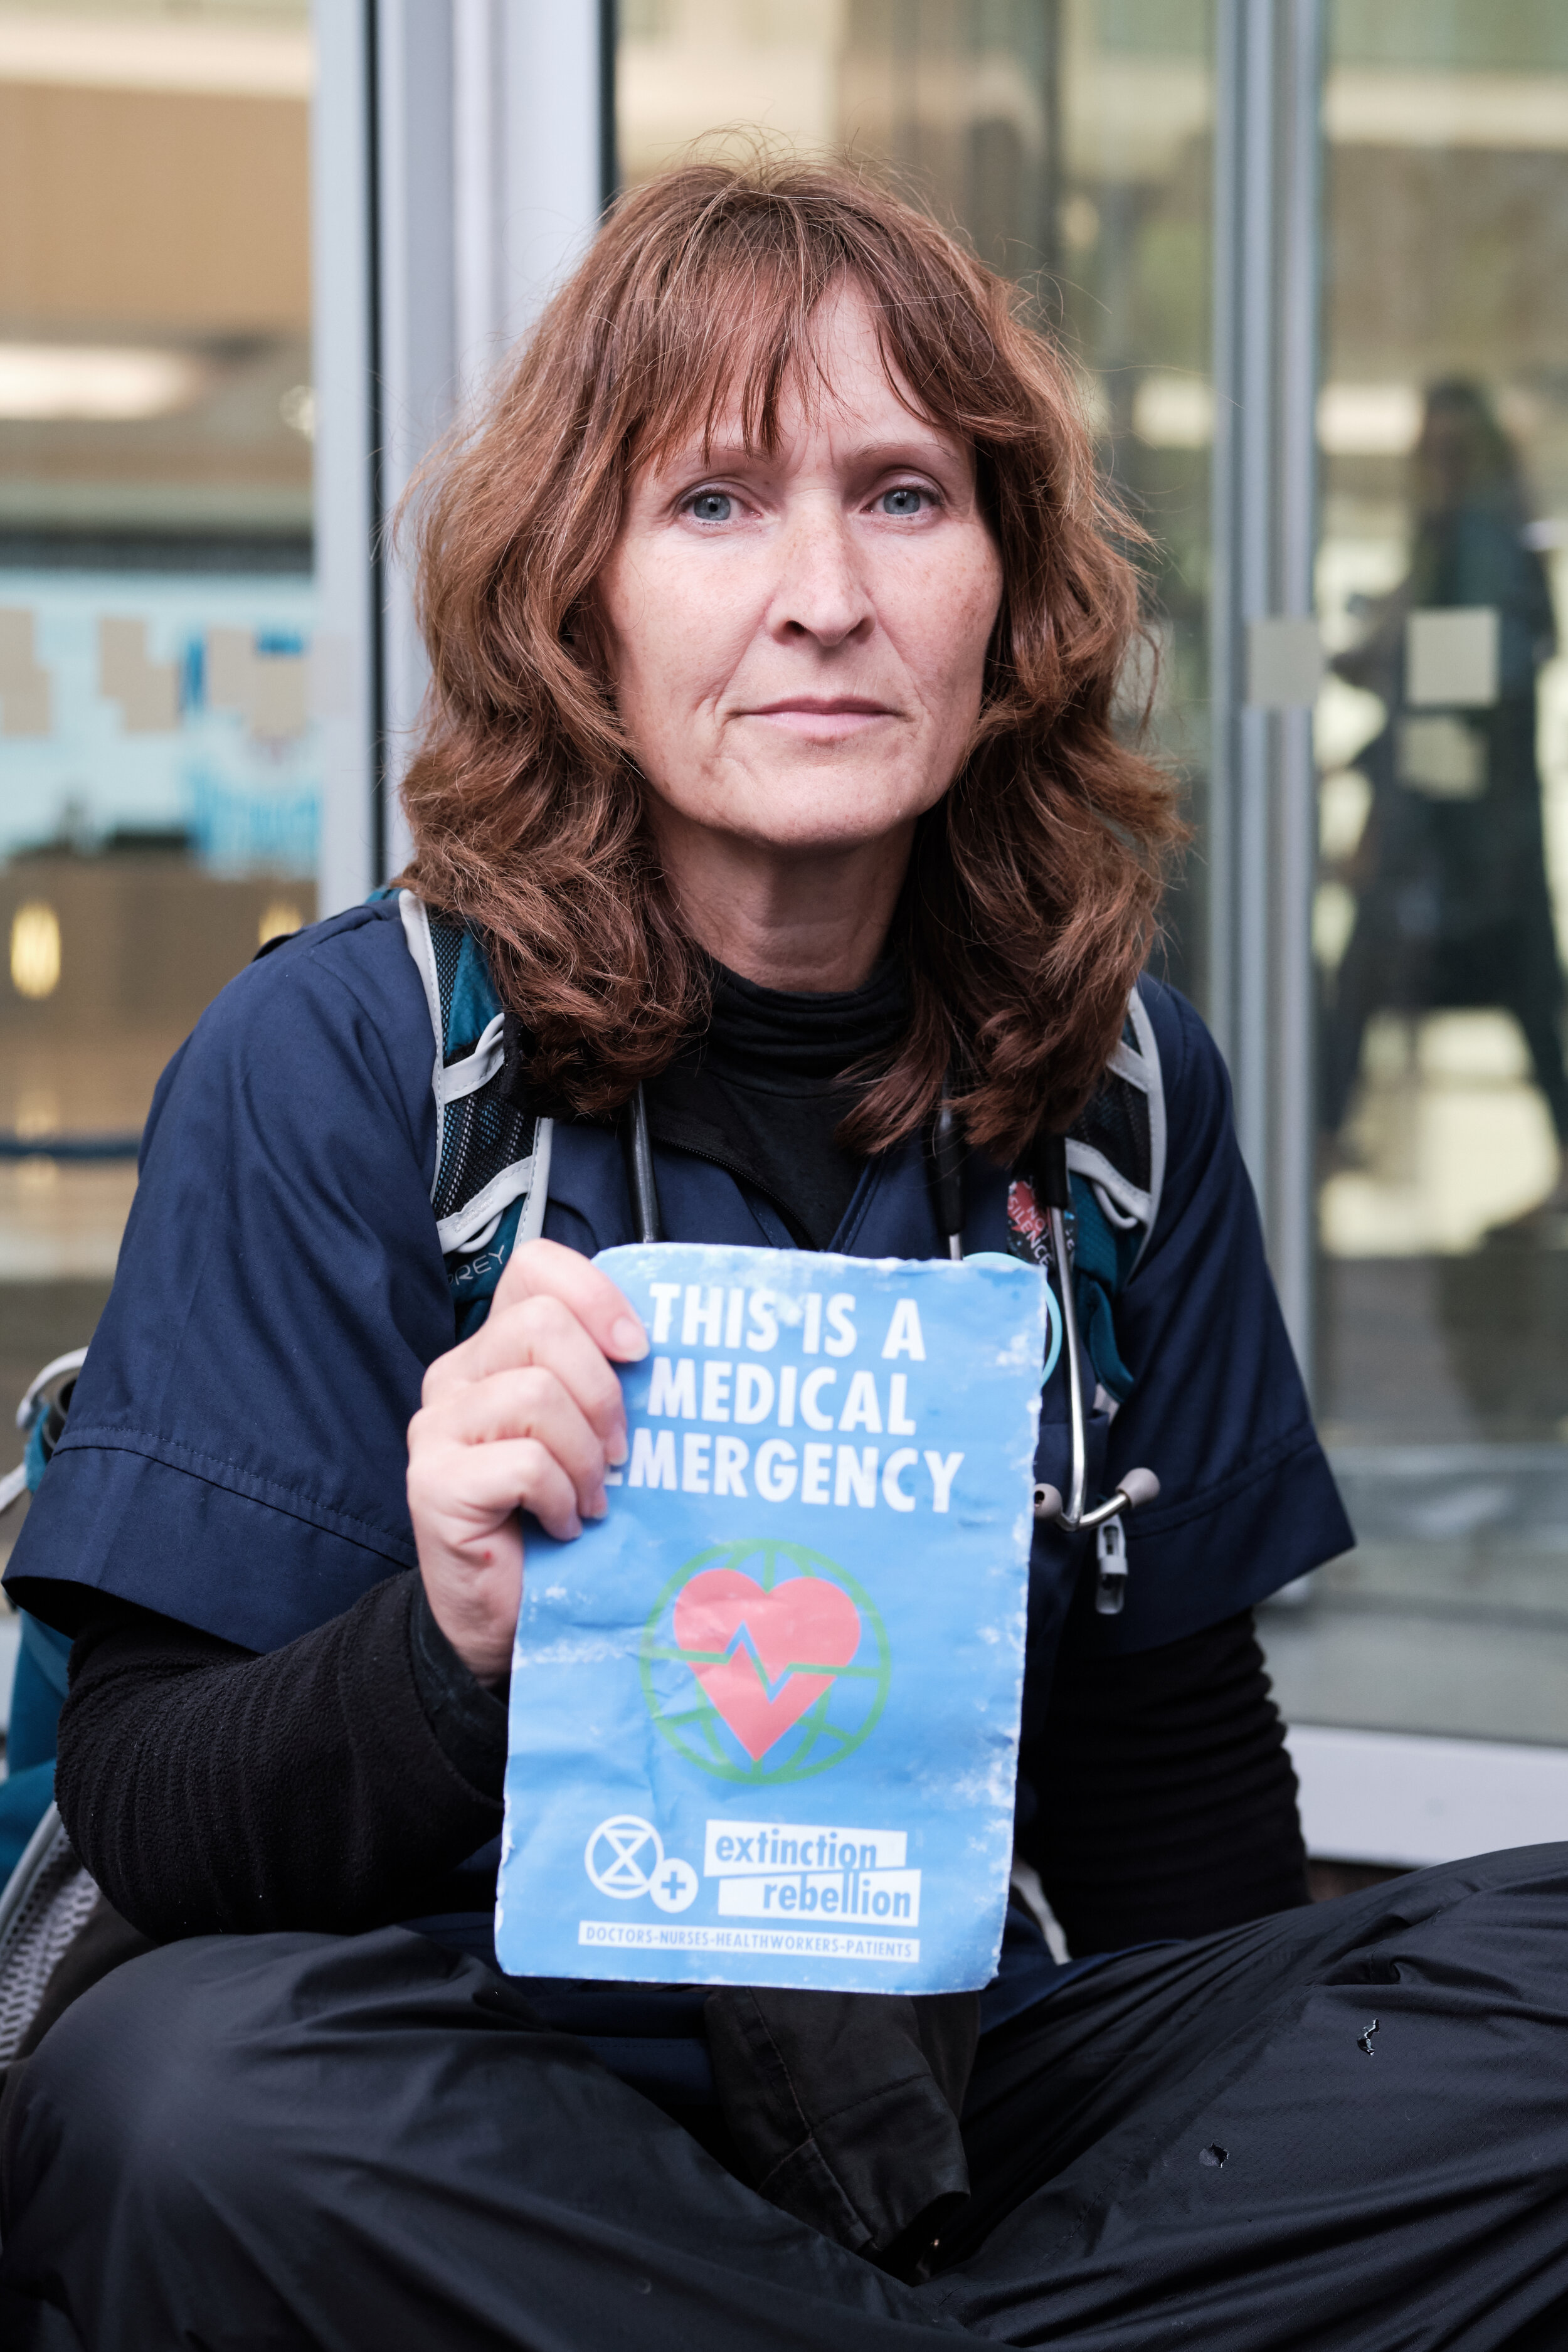  In an emerging movement of movements, Doctors for Extinction Rebellion launched on the 25th September 2019, when 30 doctors protested at the Department for Business, Energy and Industrial Strategy (BEIS) against governmental inaction, glueing themse